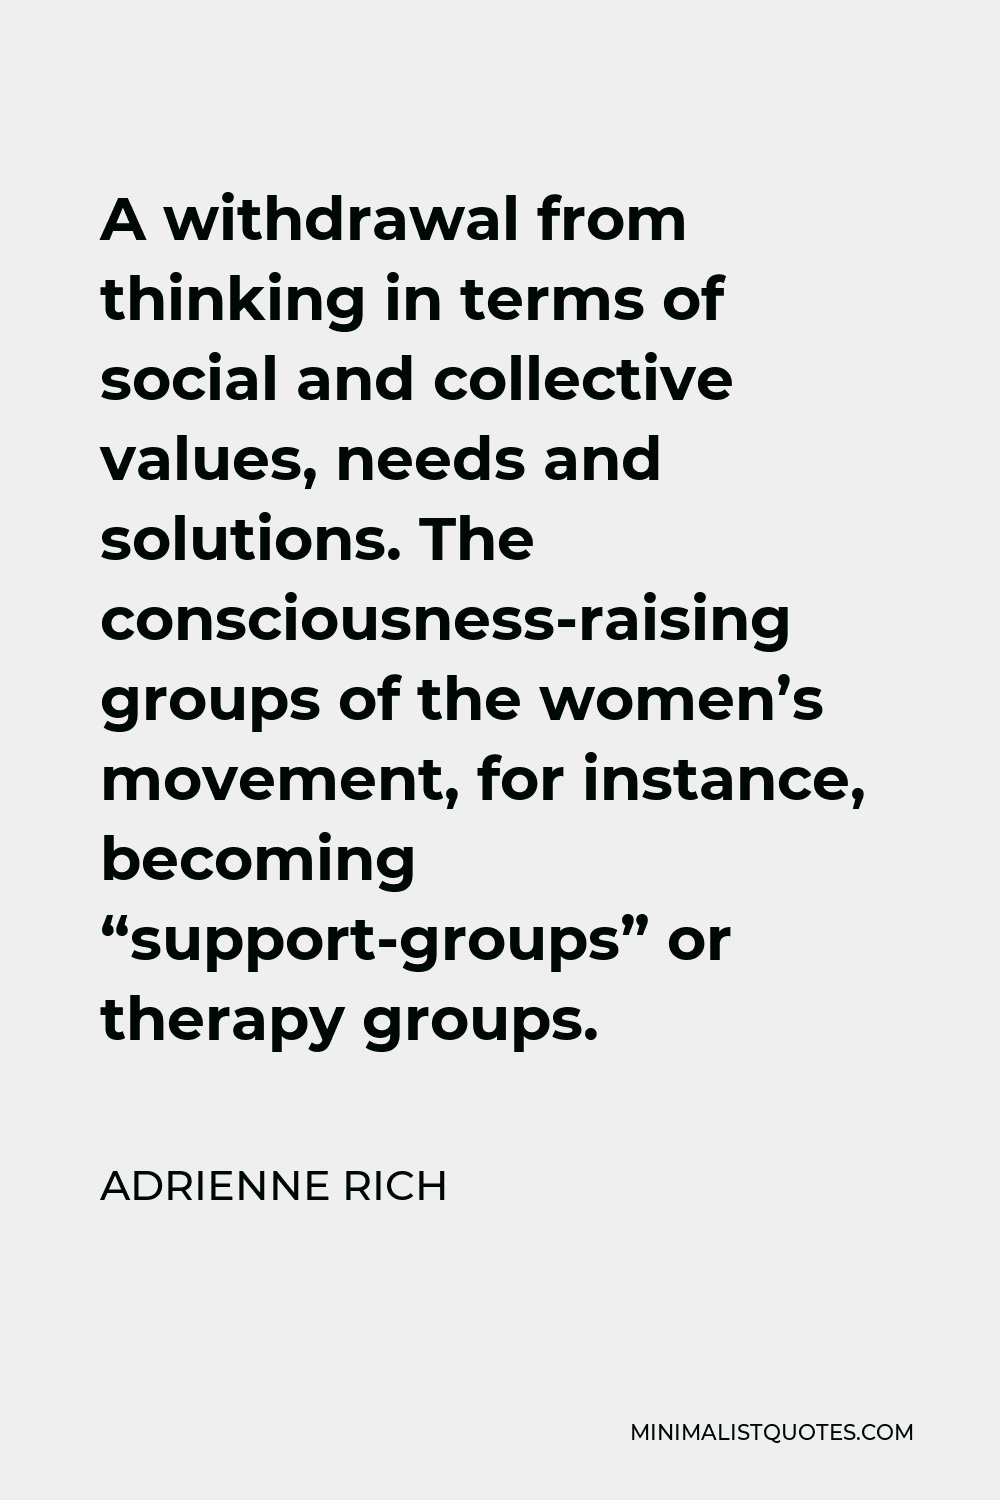 Adrienne Rich Quote - A withdrawal from thinking in terms of social and collective values, needs and solutions. The consciousness-raising groups of the women’s movement, for instance, becoming “support-groups” or therapy groups.